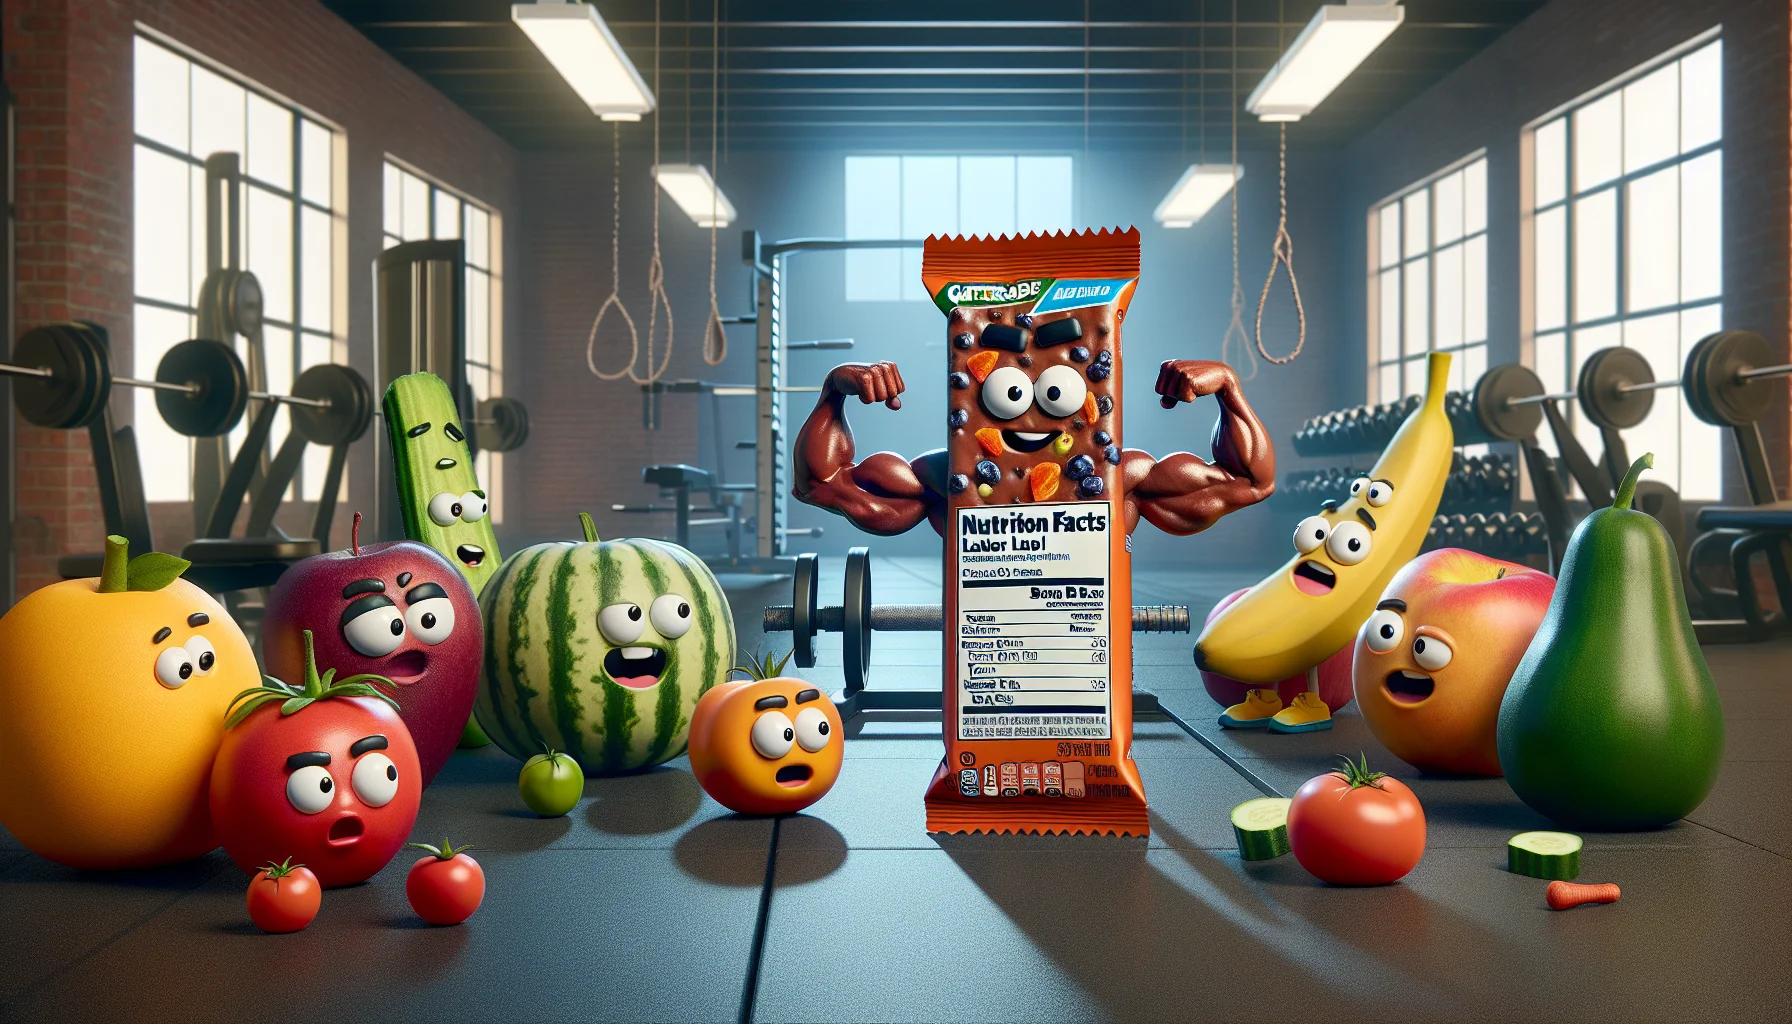 Create a delightful scenario filled with humor centered around a nutrition facts label of Gatorade protein bars. In the image, imagine an animated protein bar with facial features, looking flexed and strong, showcasing its nutrition facts label to an audience of various fruits and vegetables who seem to be in awe. The scene is set in a gym background to underline the connection with sports and fitness. Please do not include any brand logos in the design.